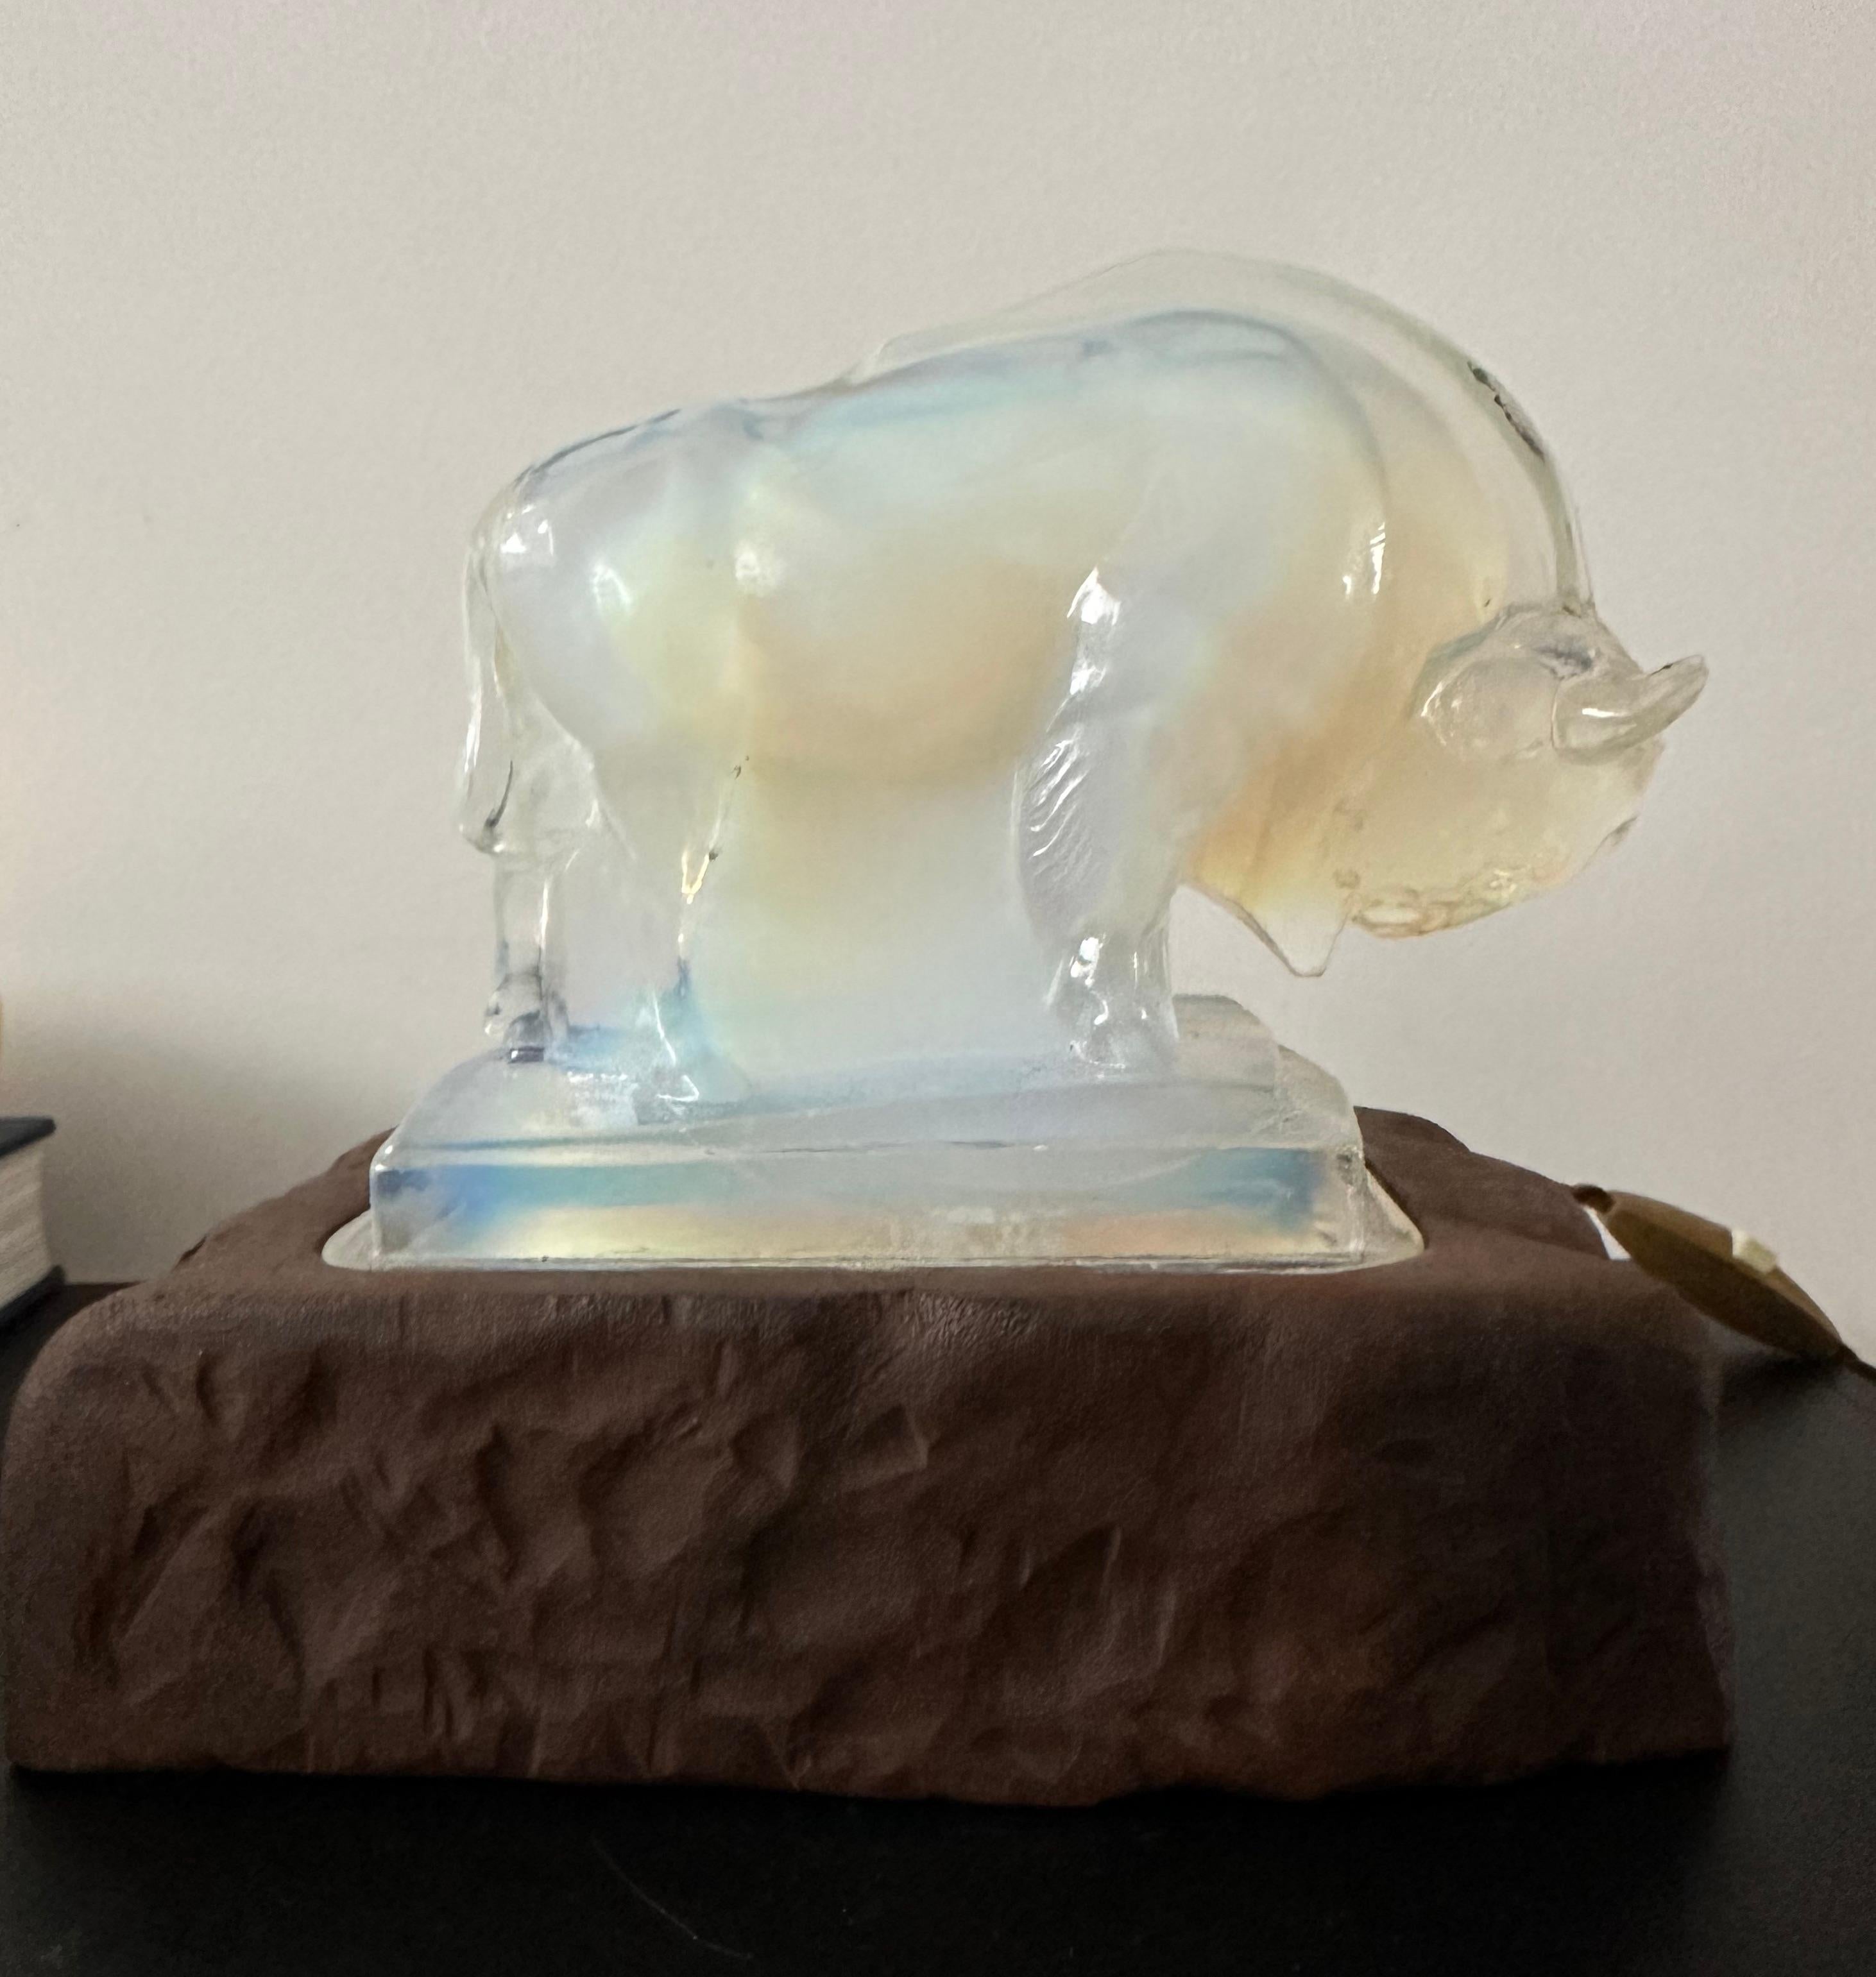 Rare and stylish bison sculpture lampby EDMOND ETLING.

This beautiful and truly artistic Art Deco table lamp comes with the signature 